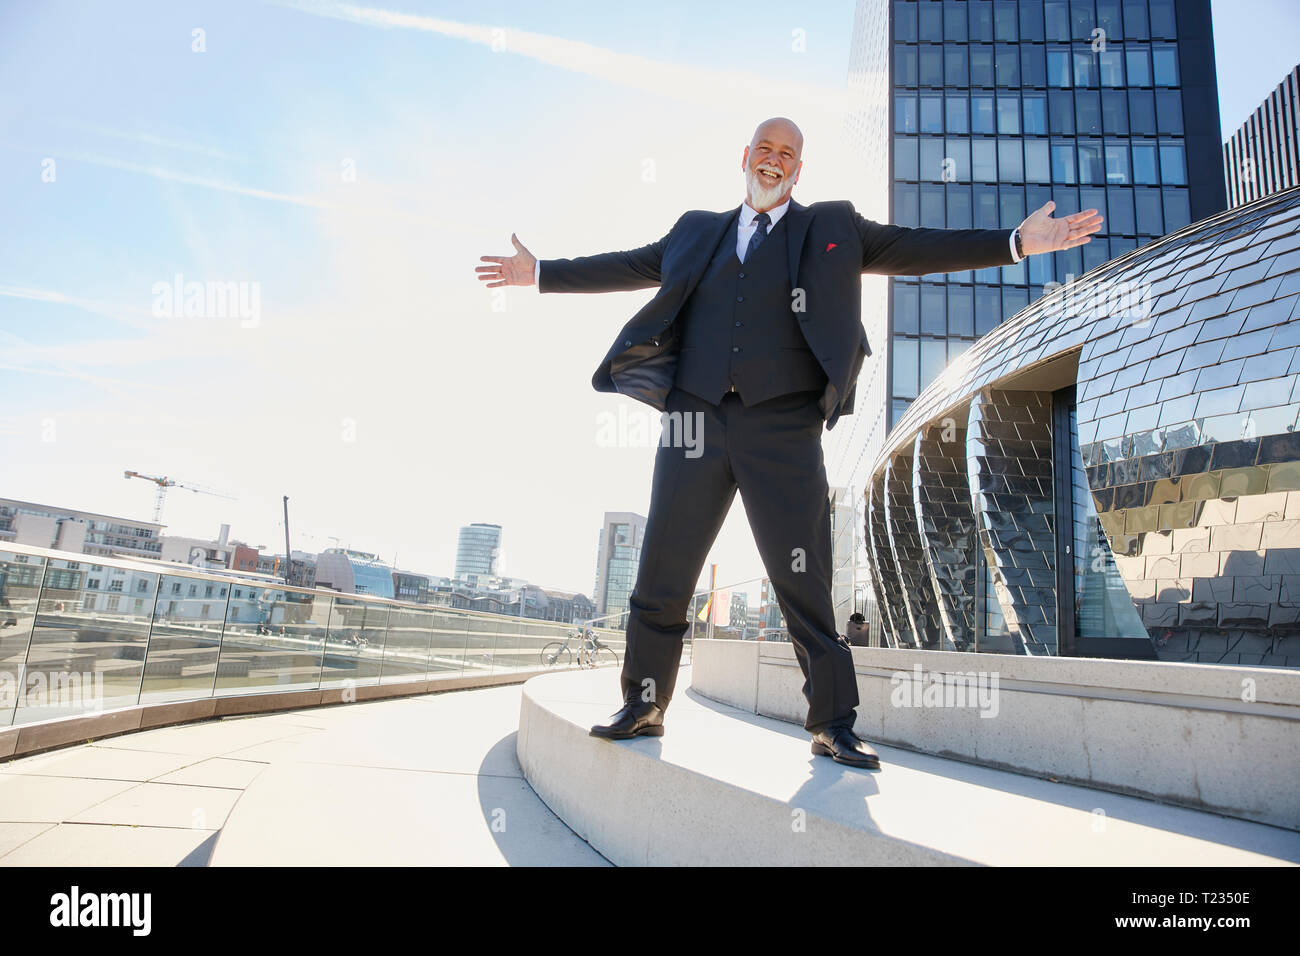 Elegant businessman standing with arms out in the city, laughing happily Stock Photo